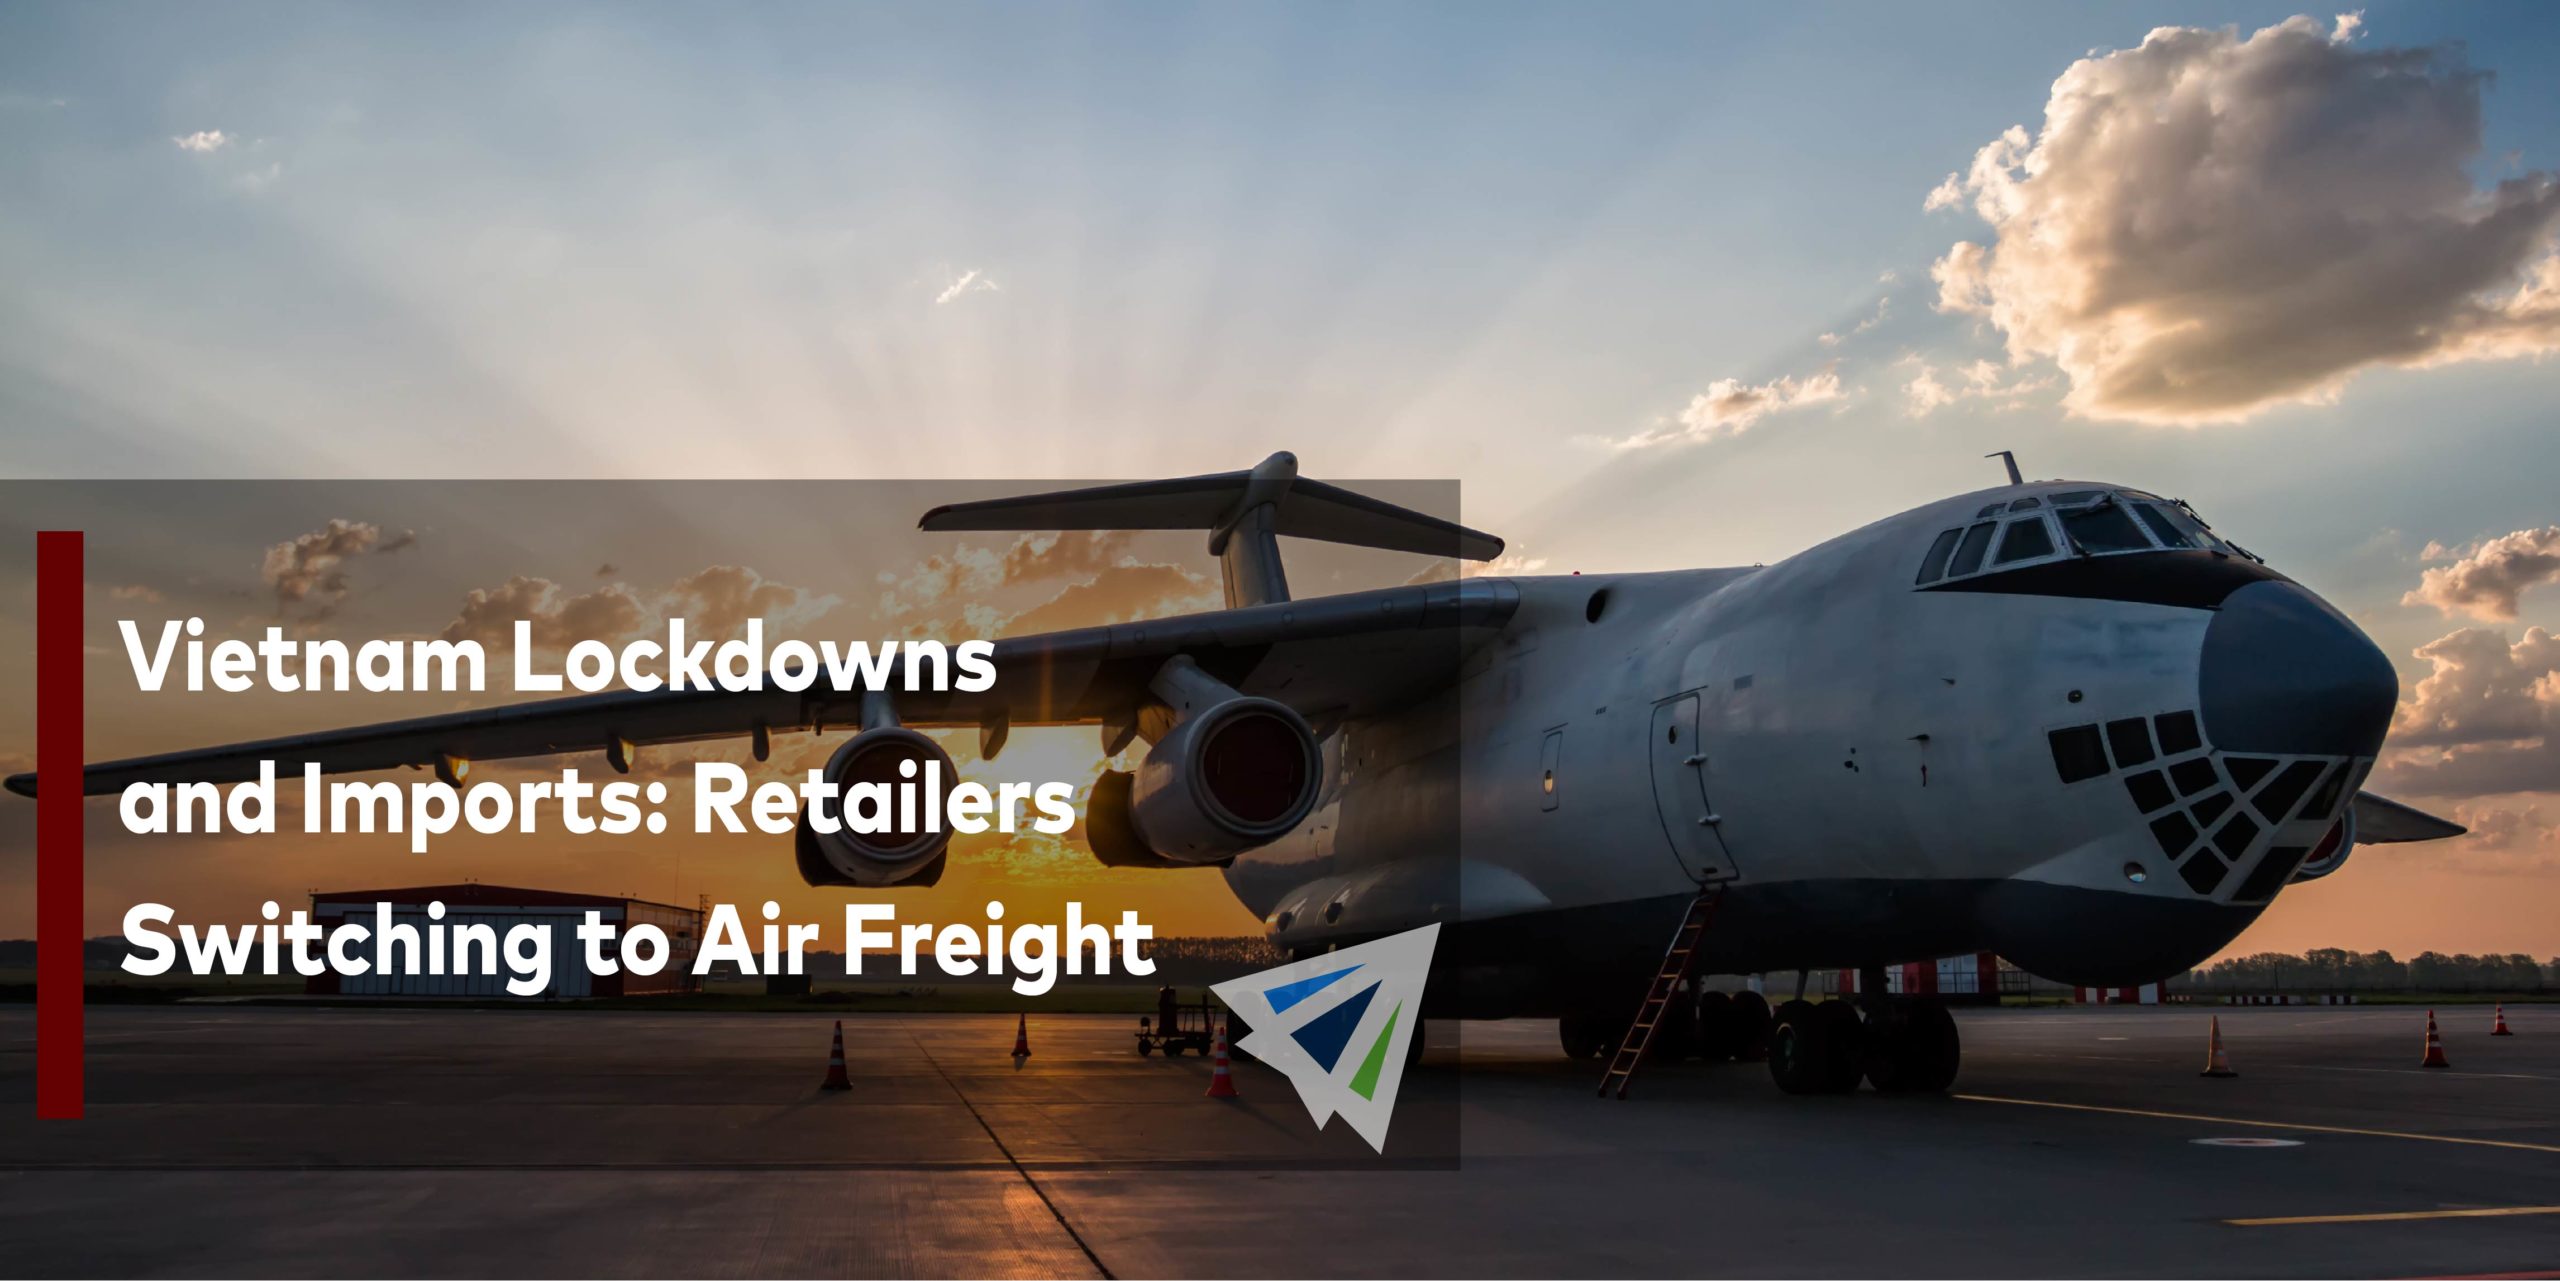 Vietnam Lockdowns and Imports: Retailers Switching to Air Freight